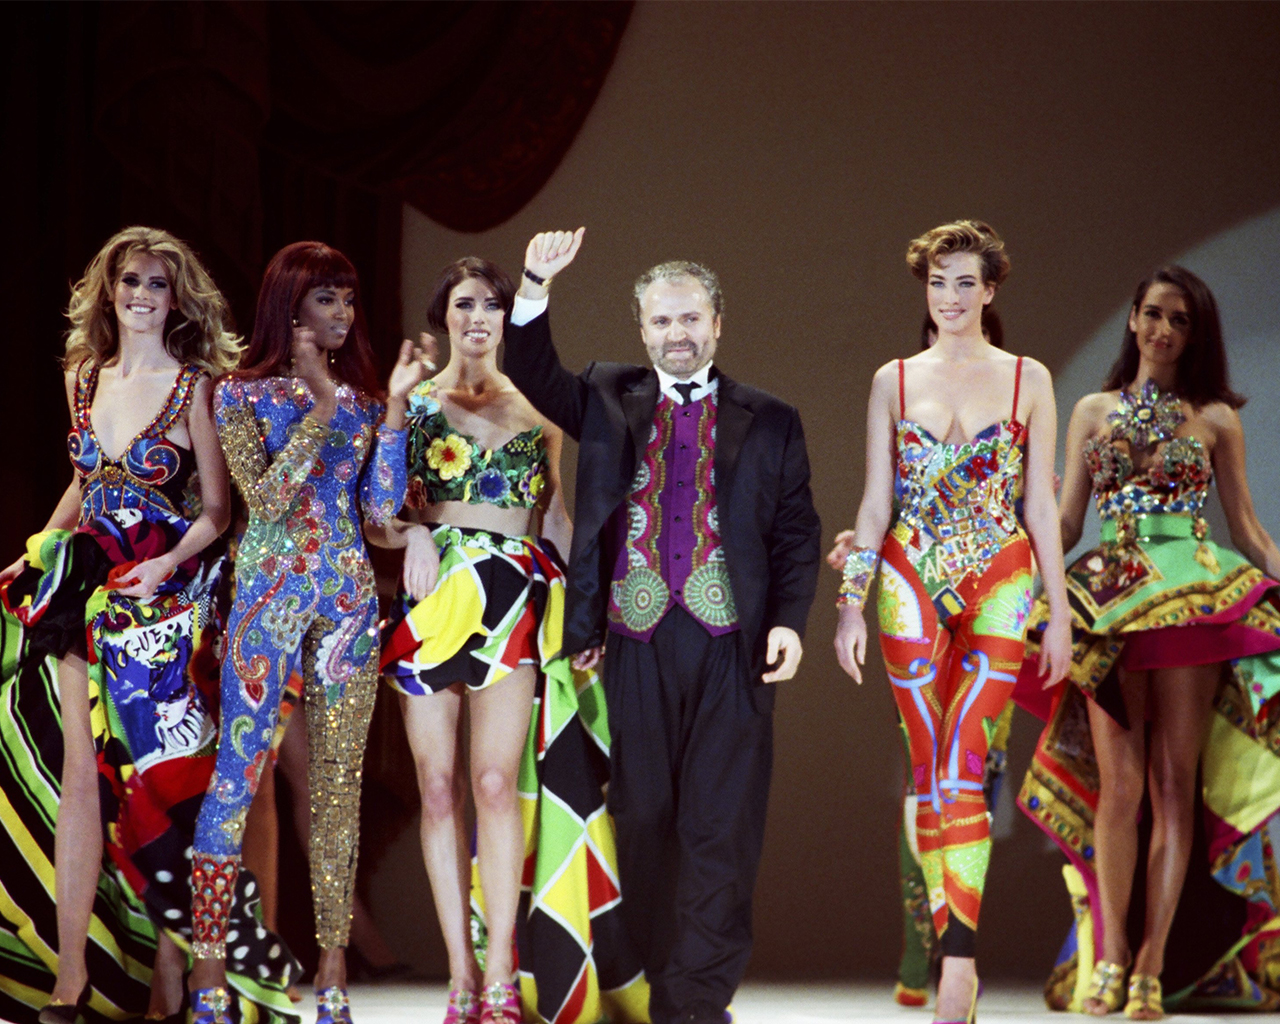 gianni versace first collection